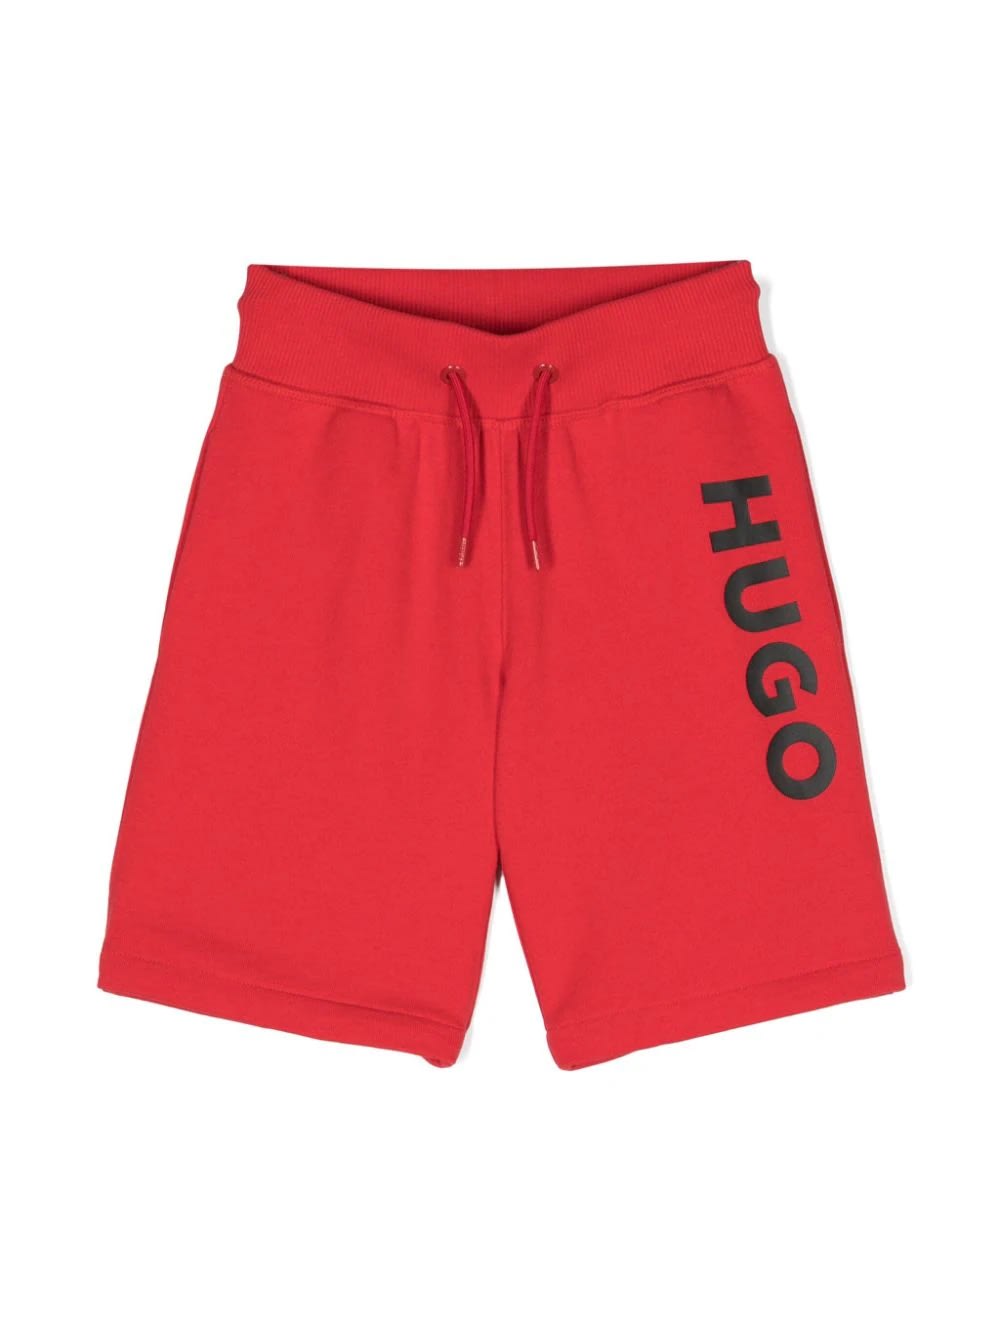 Hugo Boss Kids' Sports Shorts With Print In Red